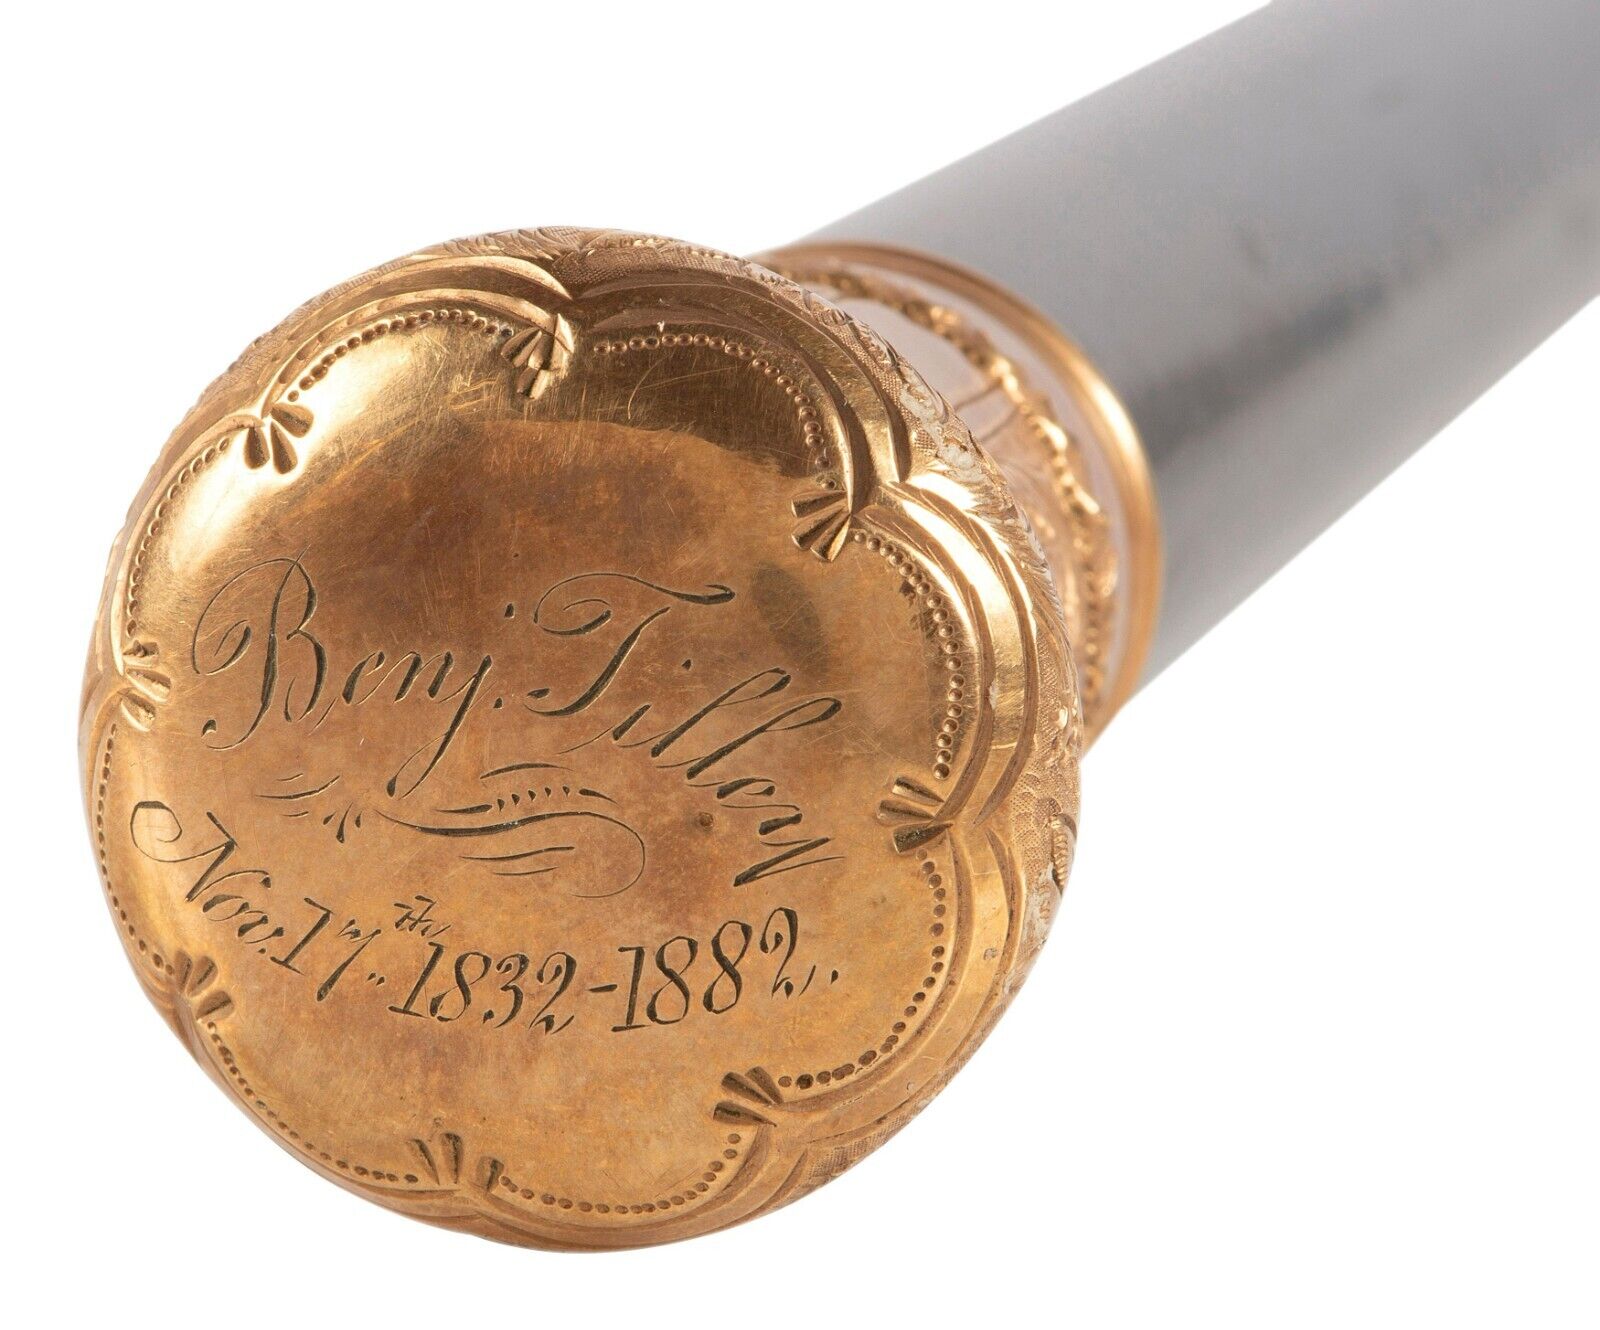 Gold-Plated Cane Engraved to Benjamin F. Tilley - First American Samoa Governor